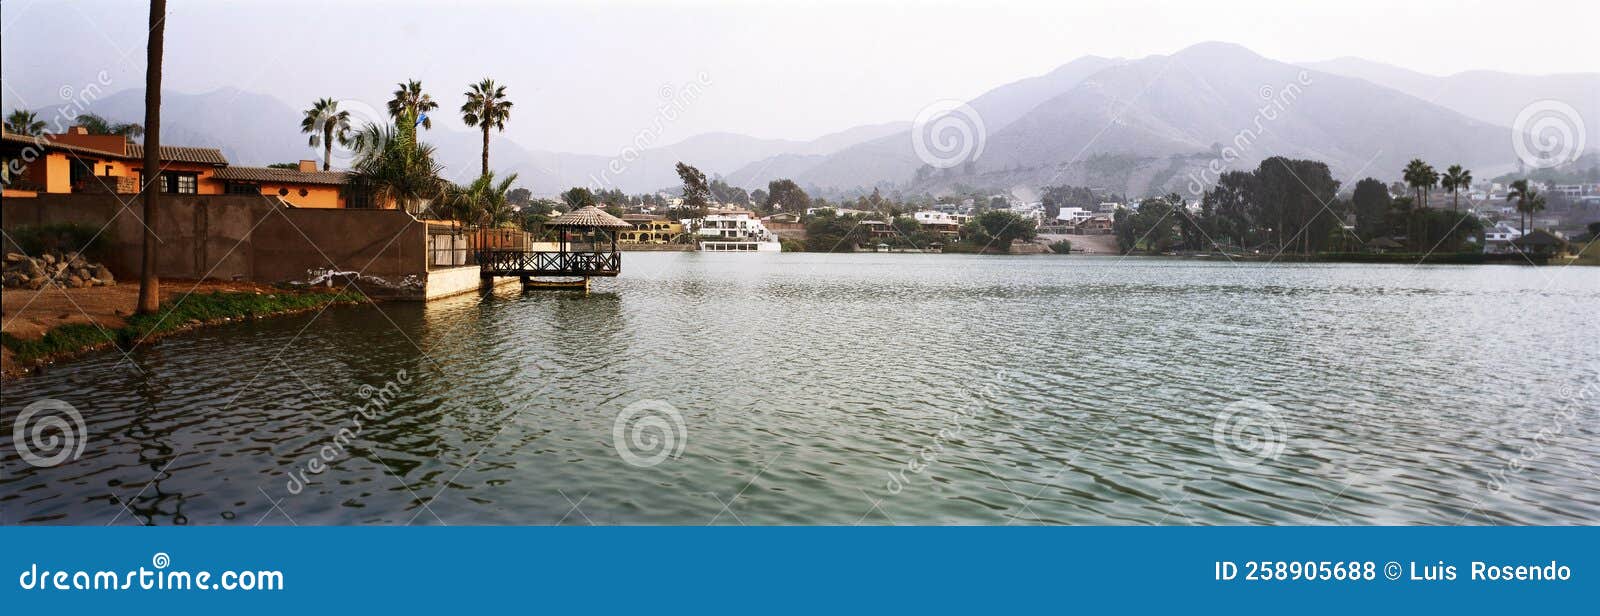 lima peru, la molina,lagoon with arquitecture and building luxury